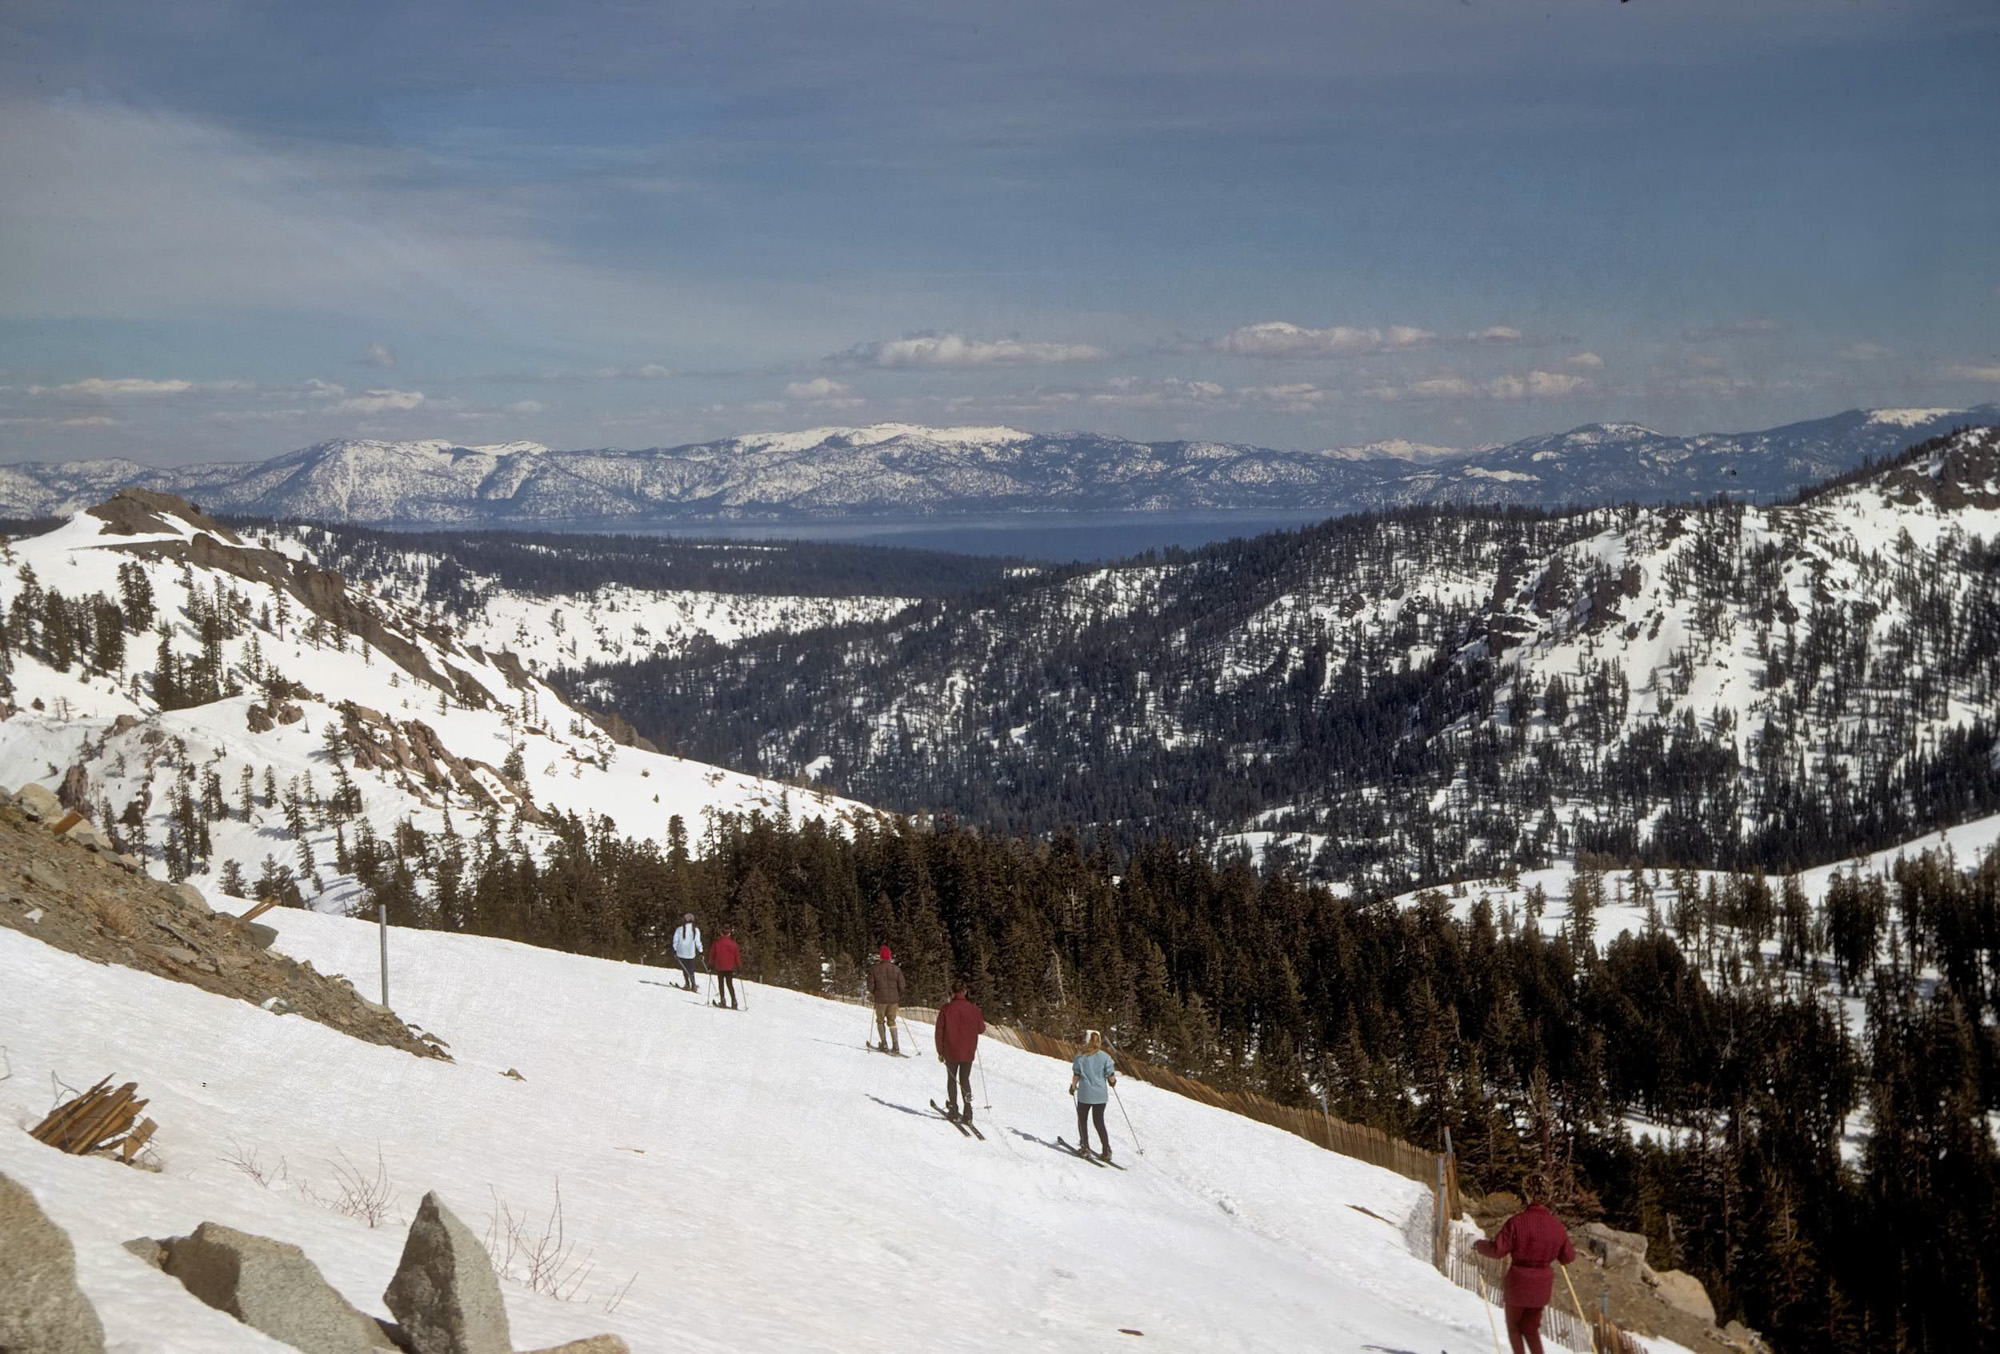 Squaw Valley, 1965-1968, just off the Cornice chairlift. Leica IIIf, f/2 Summicron, Kodachrome. View full size.